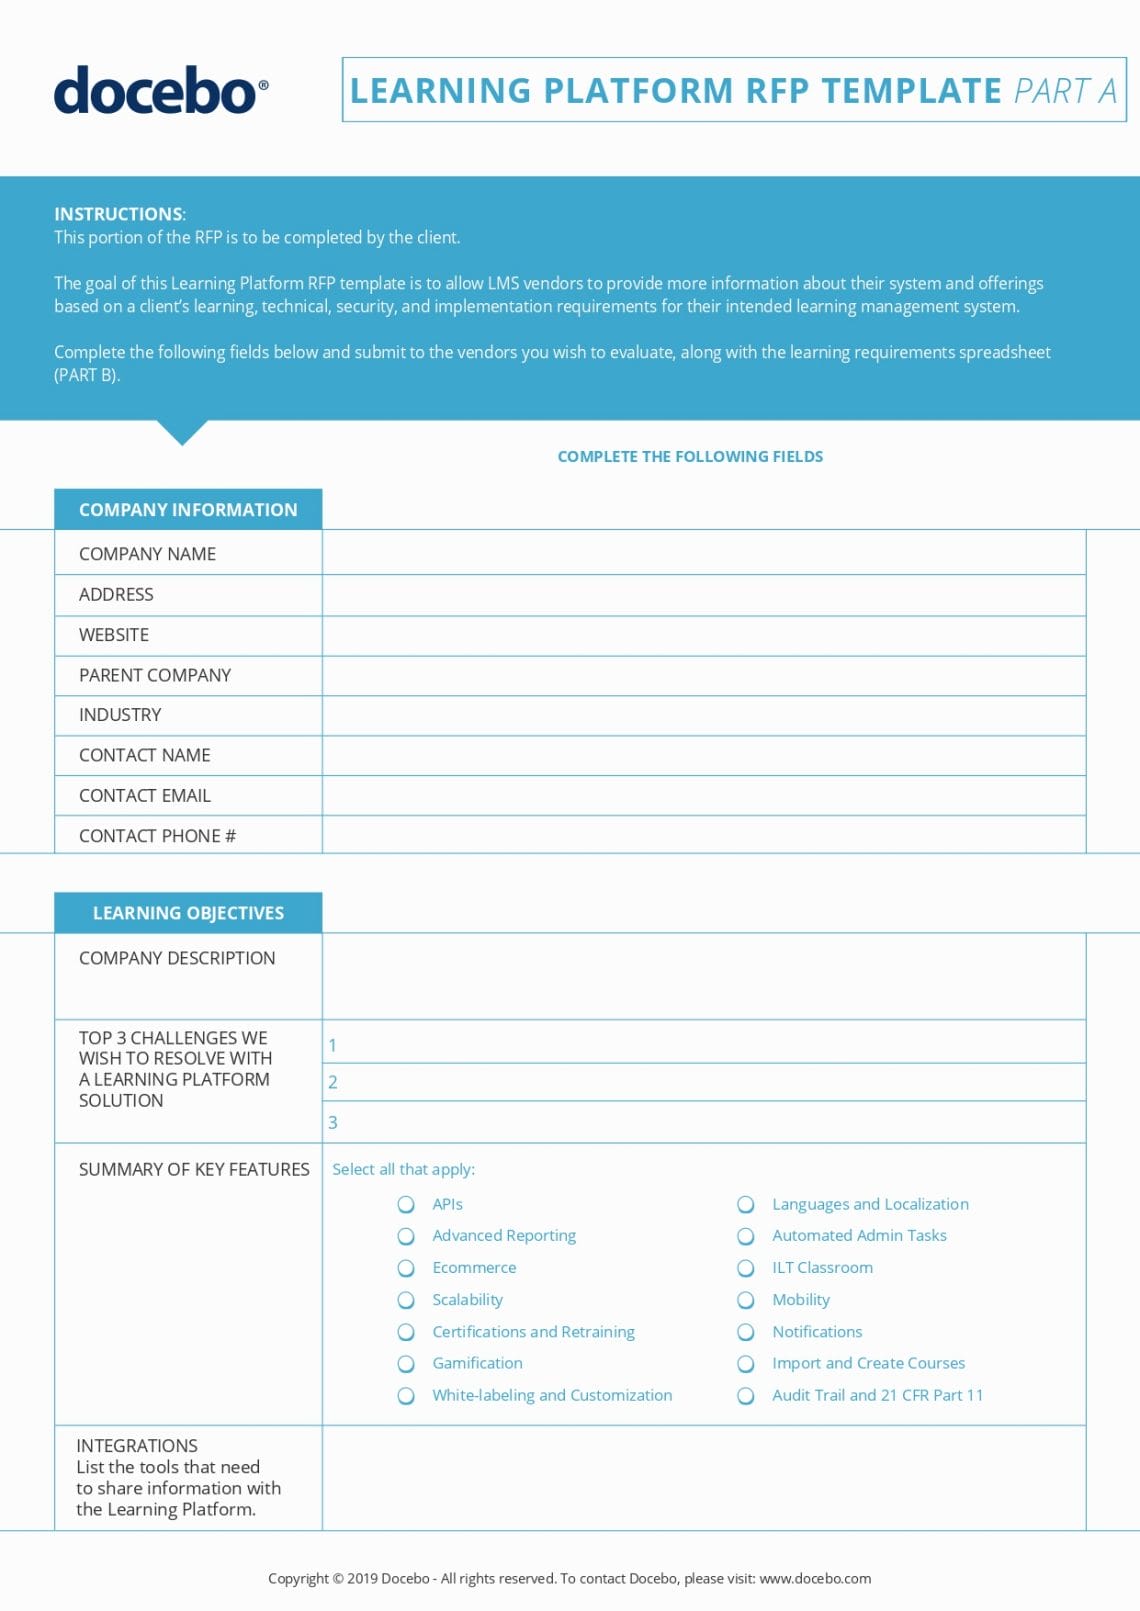 Page 1 of Docebo's LMS RFP pdf template.